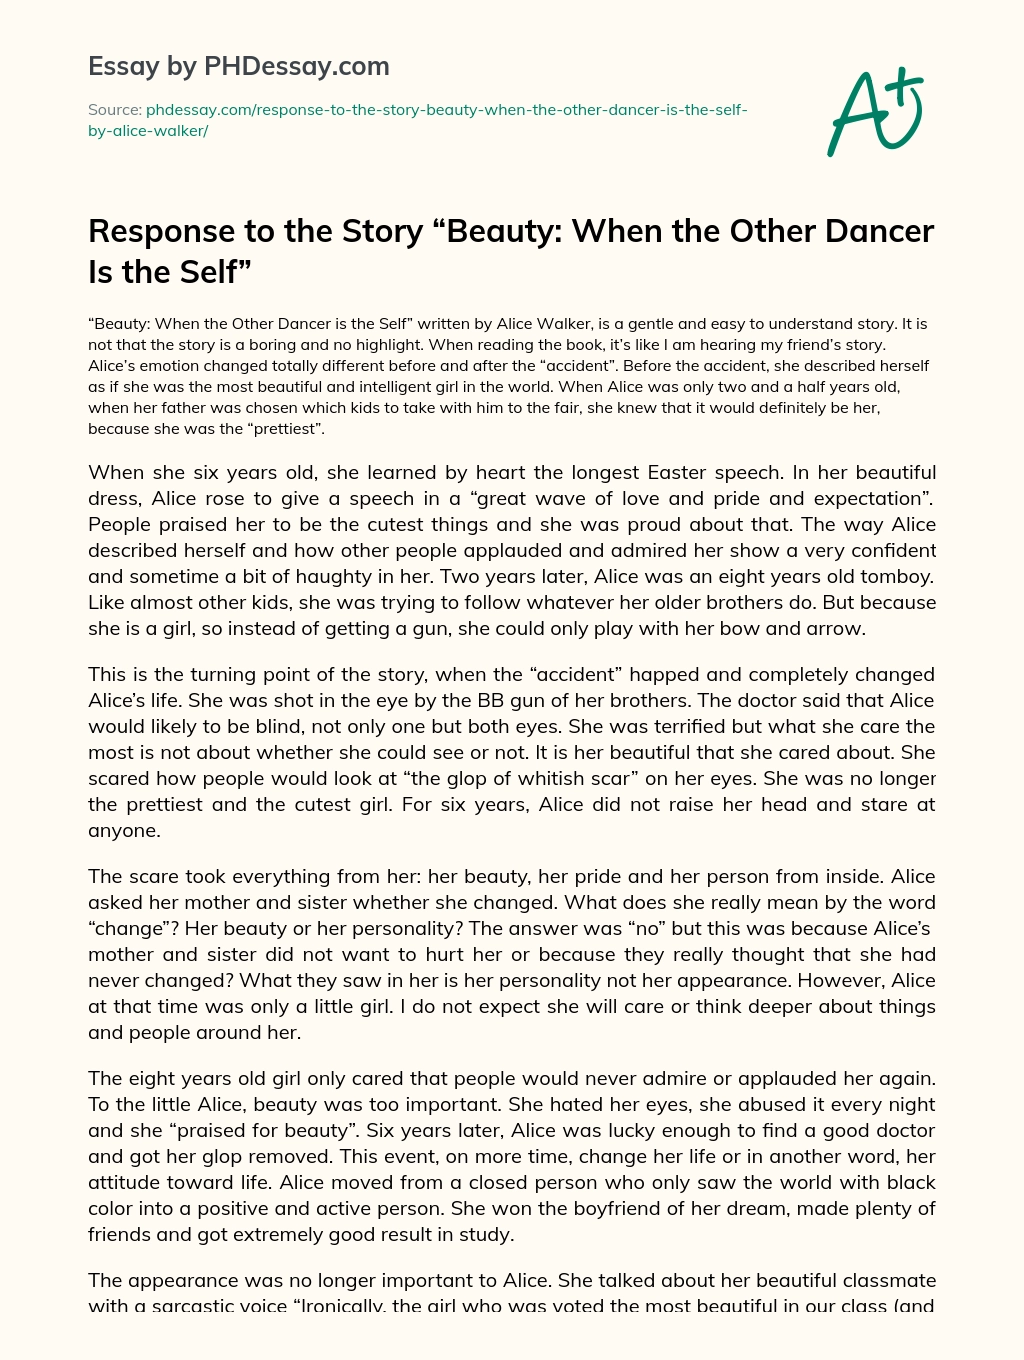 Response To The Story Beauty When The Other Dancer Is The Self Phdessay Com